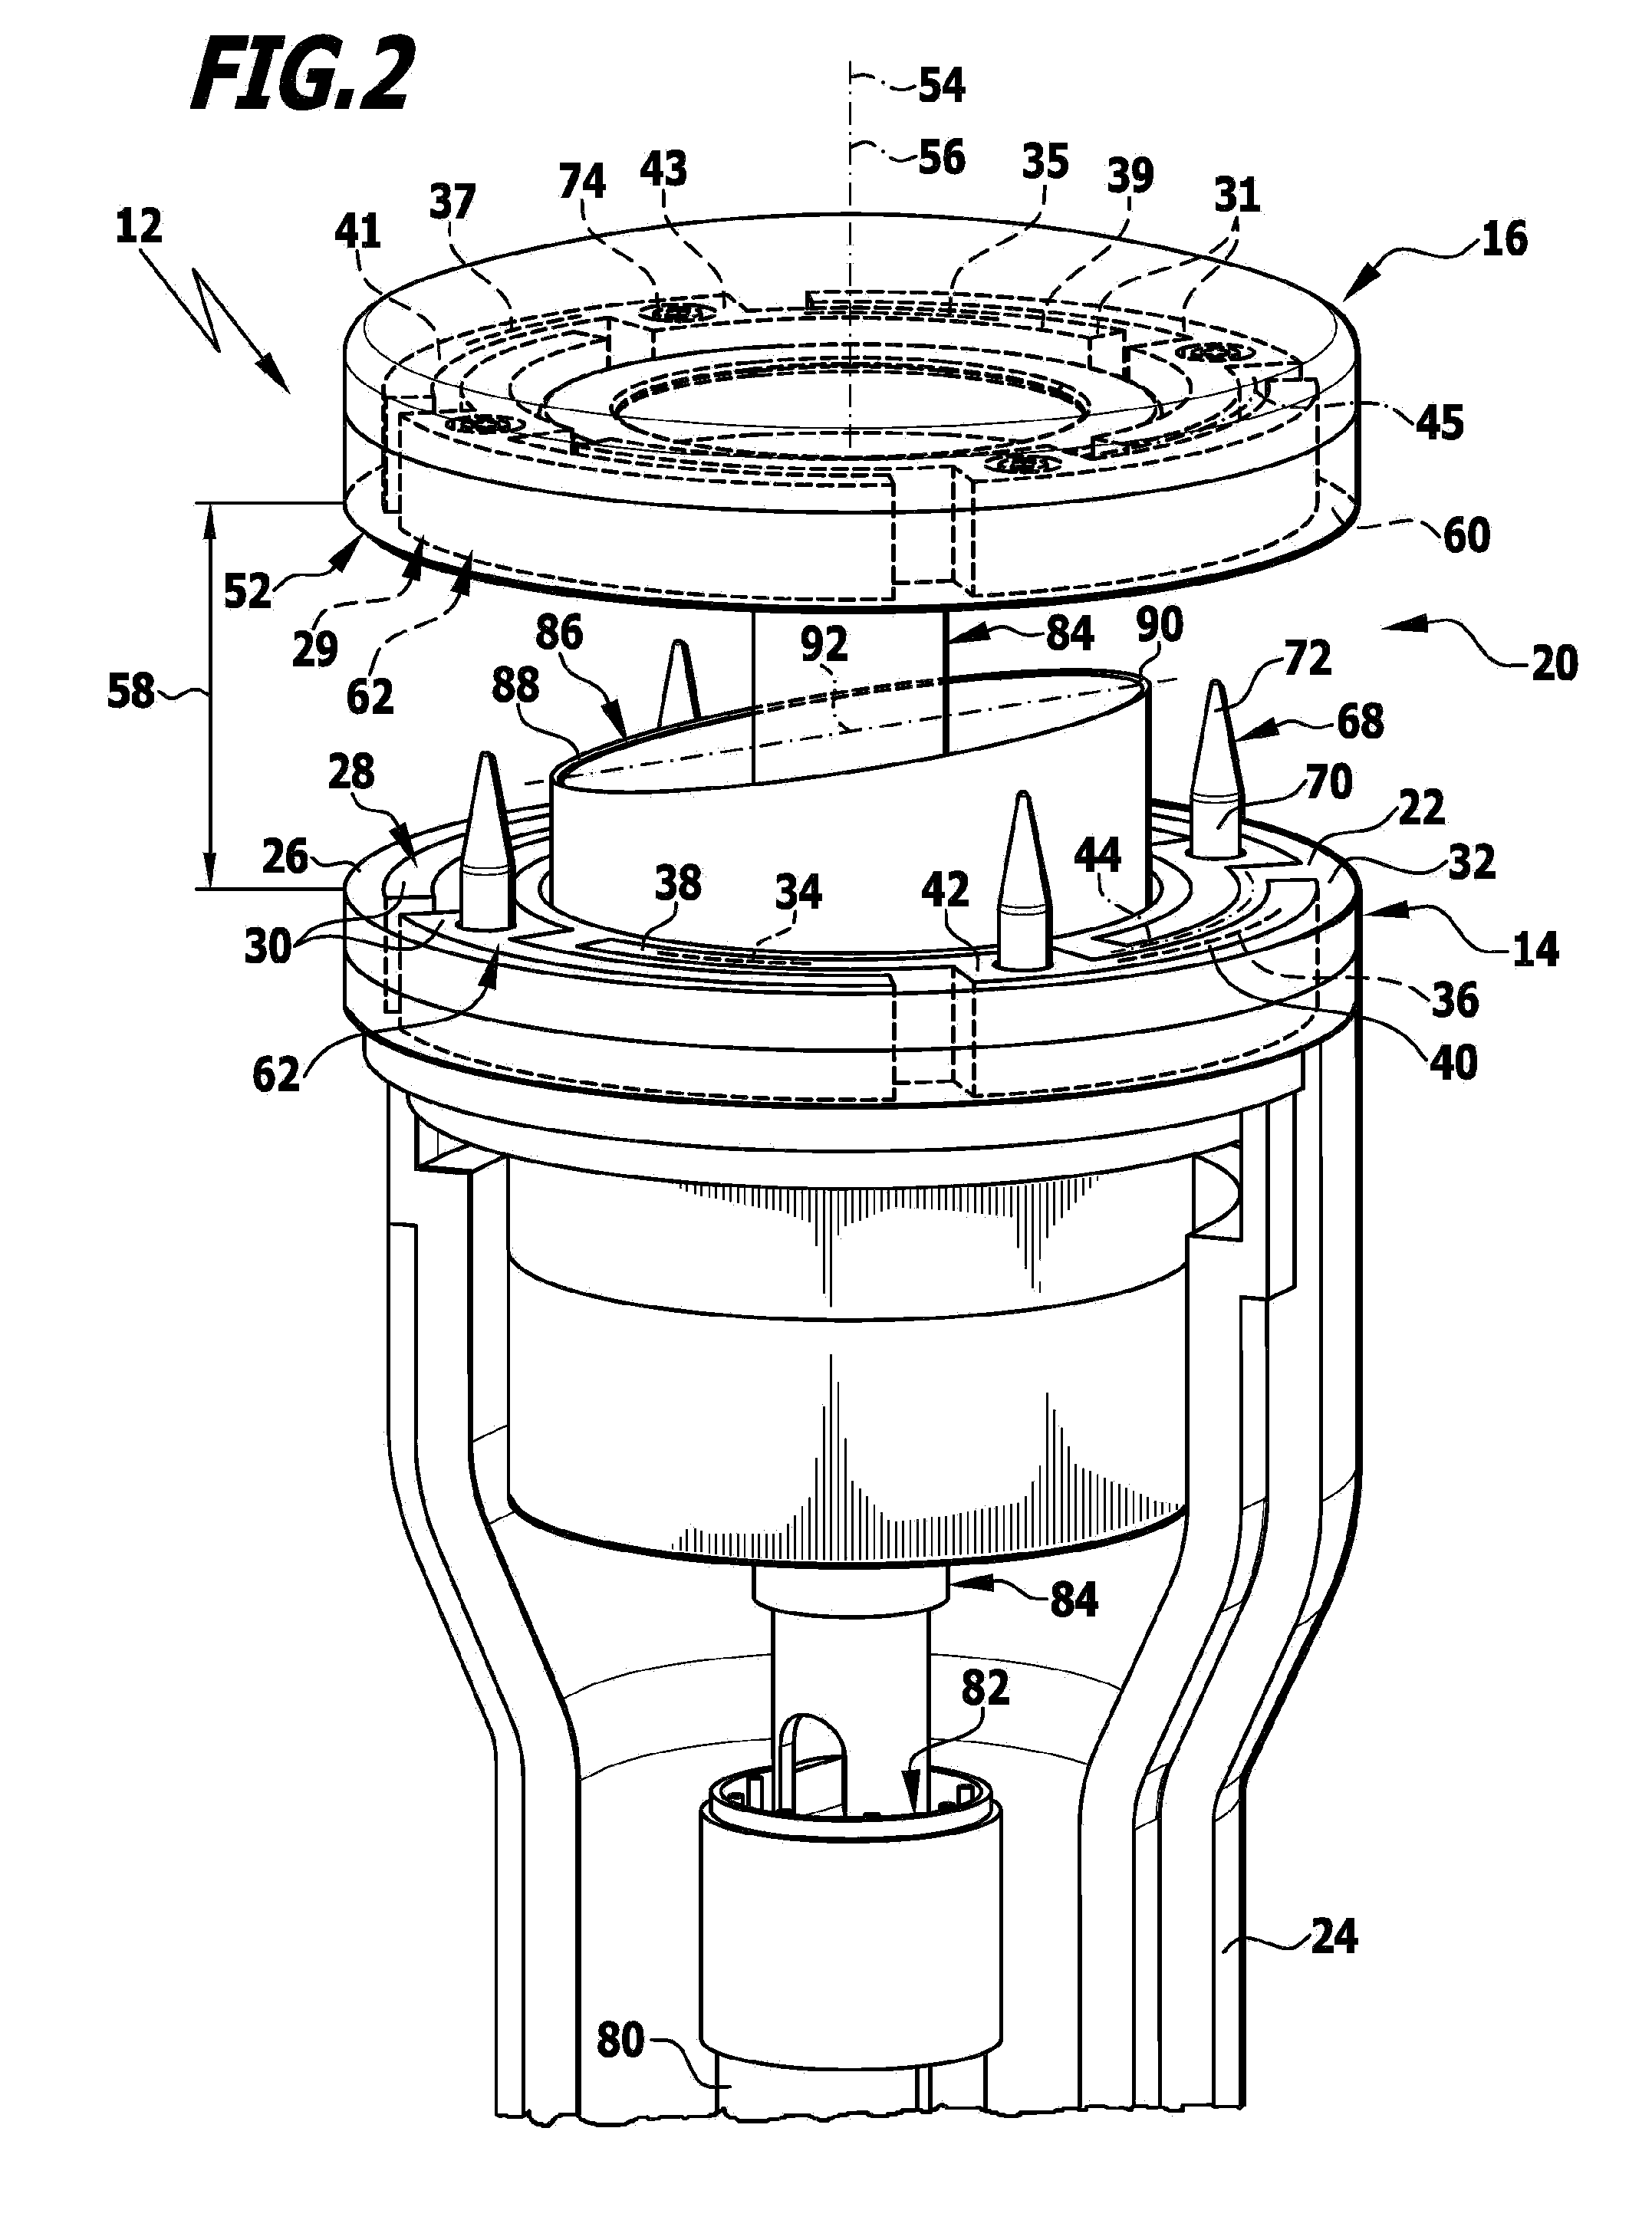 Surgical system for connecting body tissue